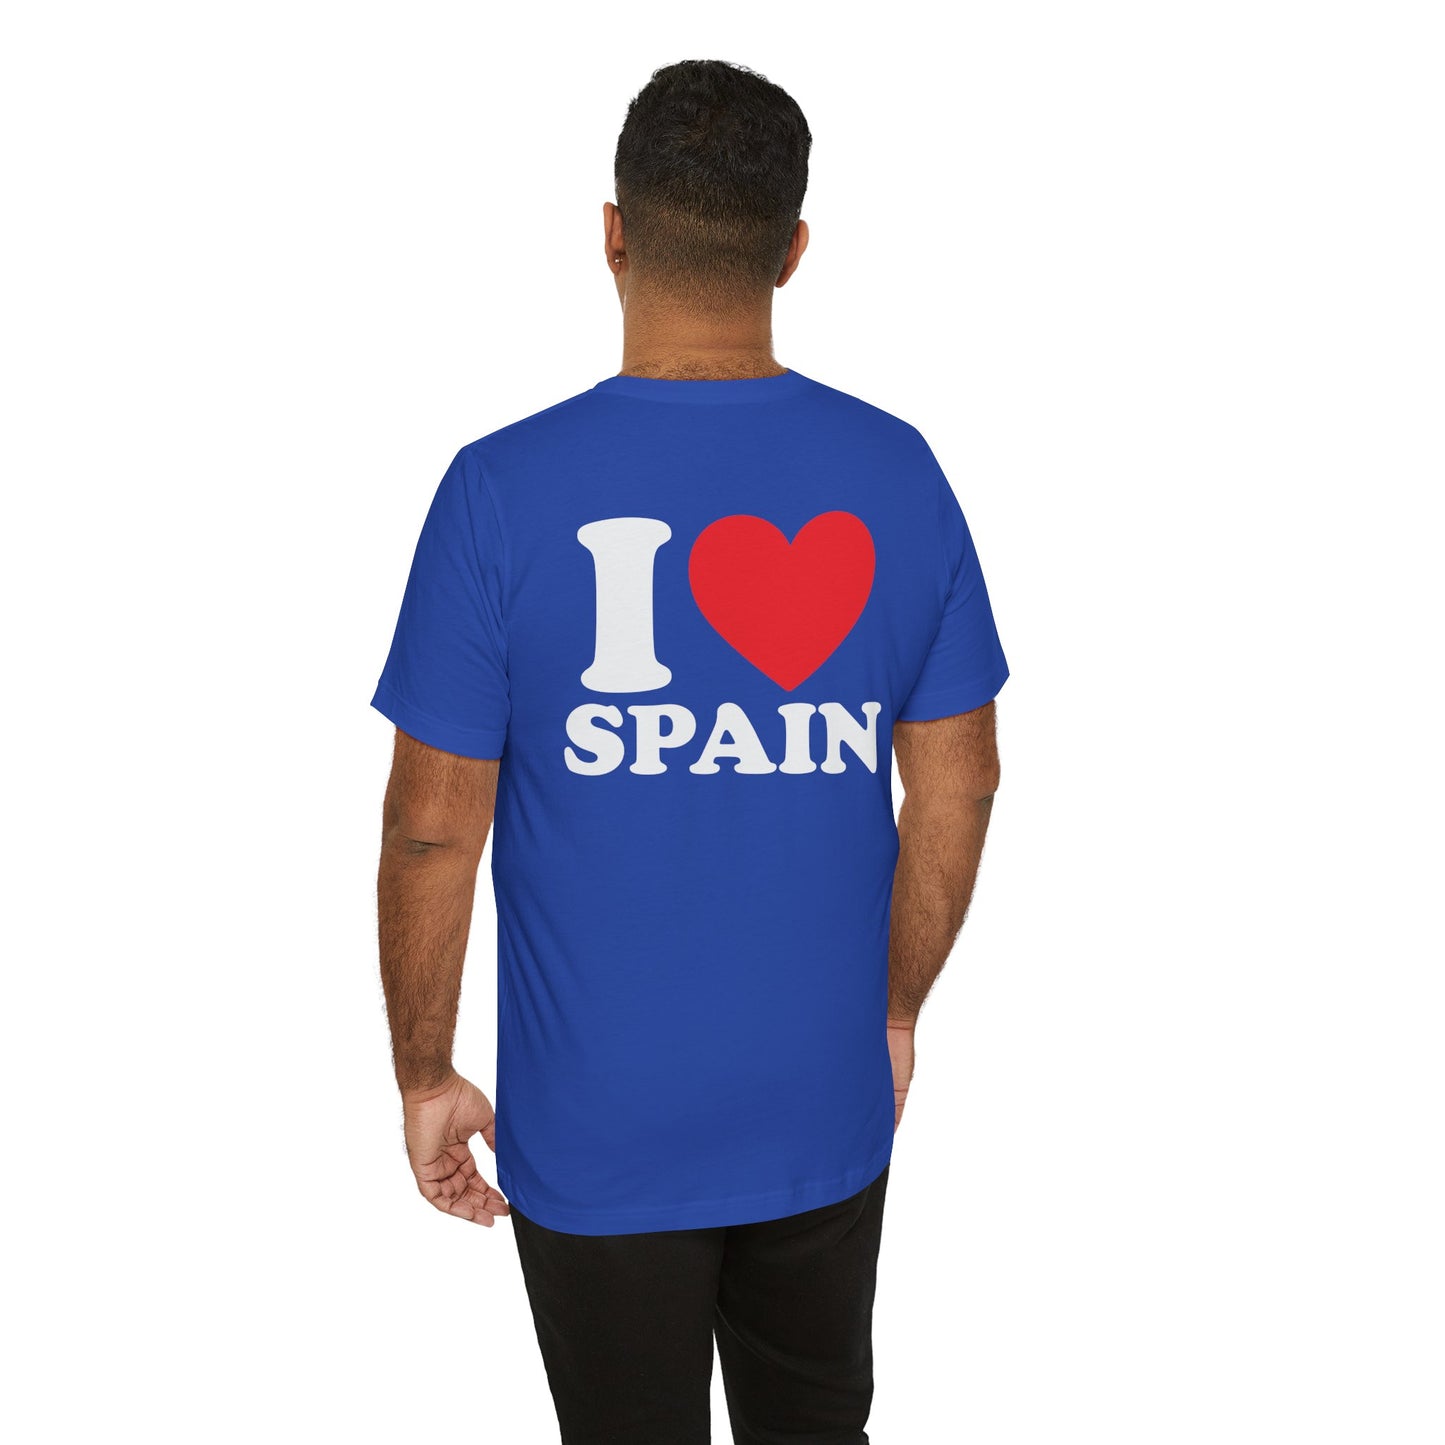 Declare Your Love for Spain with Our Unisex Jersey Short Sleeve Tee